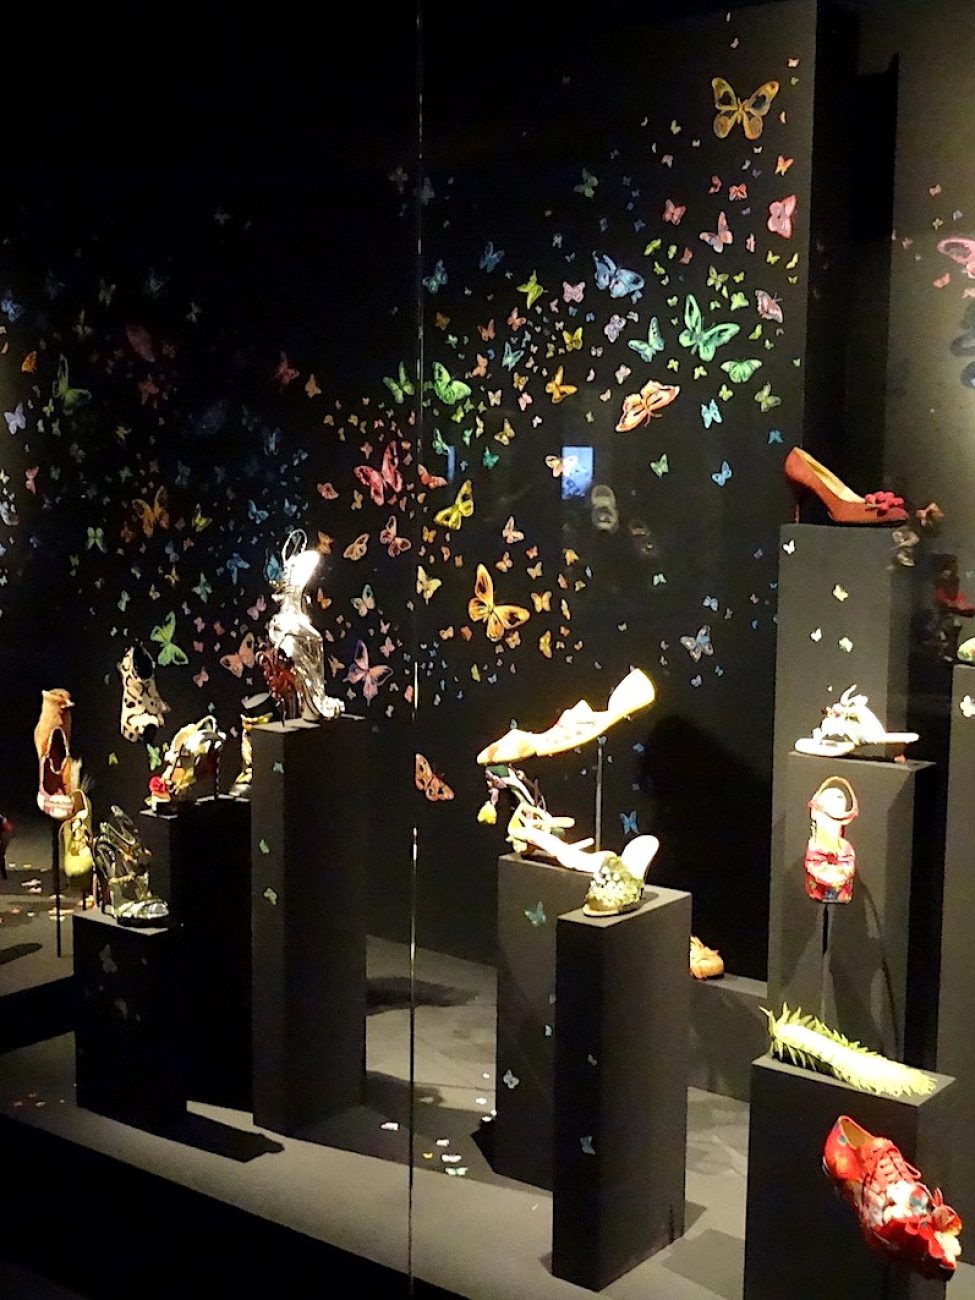 MYRIAD BUTTERFLIES ARE THE BACKDROP FOR THE EXHIBITION ”FOOTPRINT: THE TRACKS OF SHOES IN FASHION” 2016 MOMU